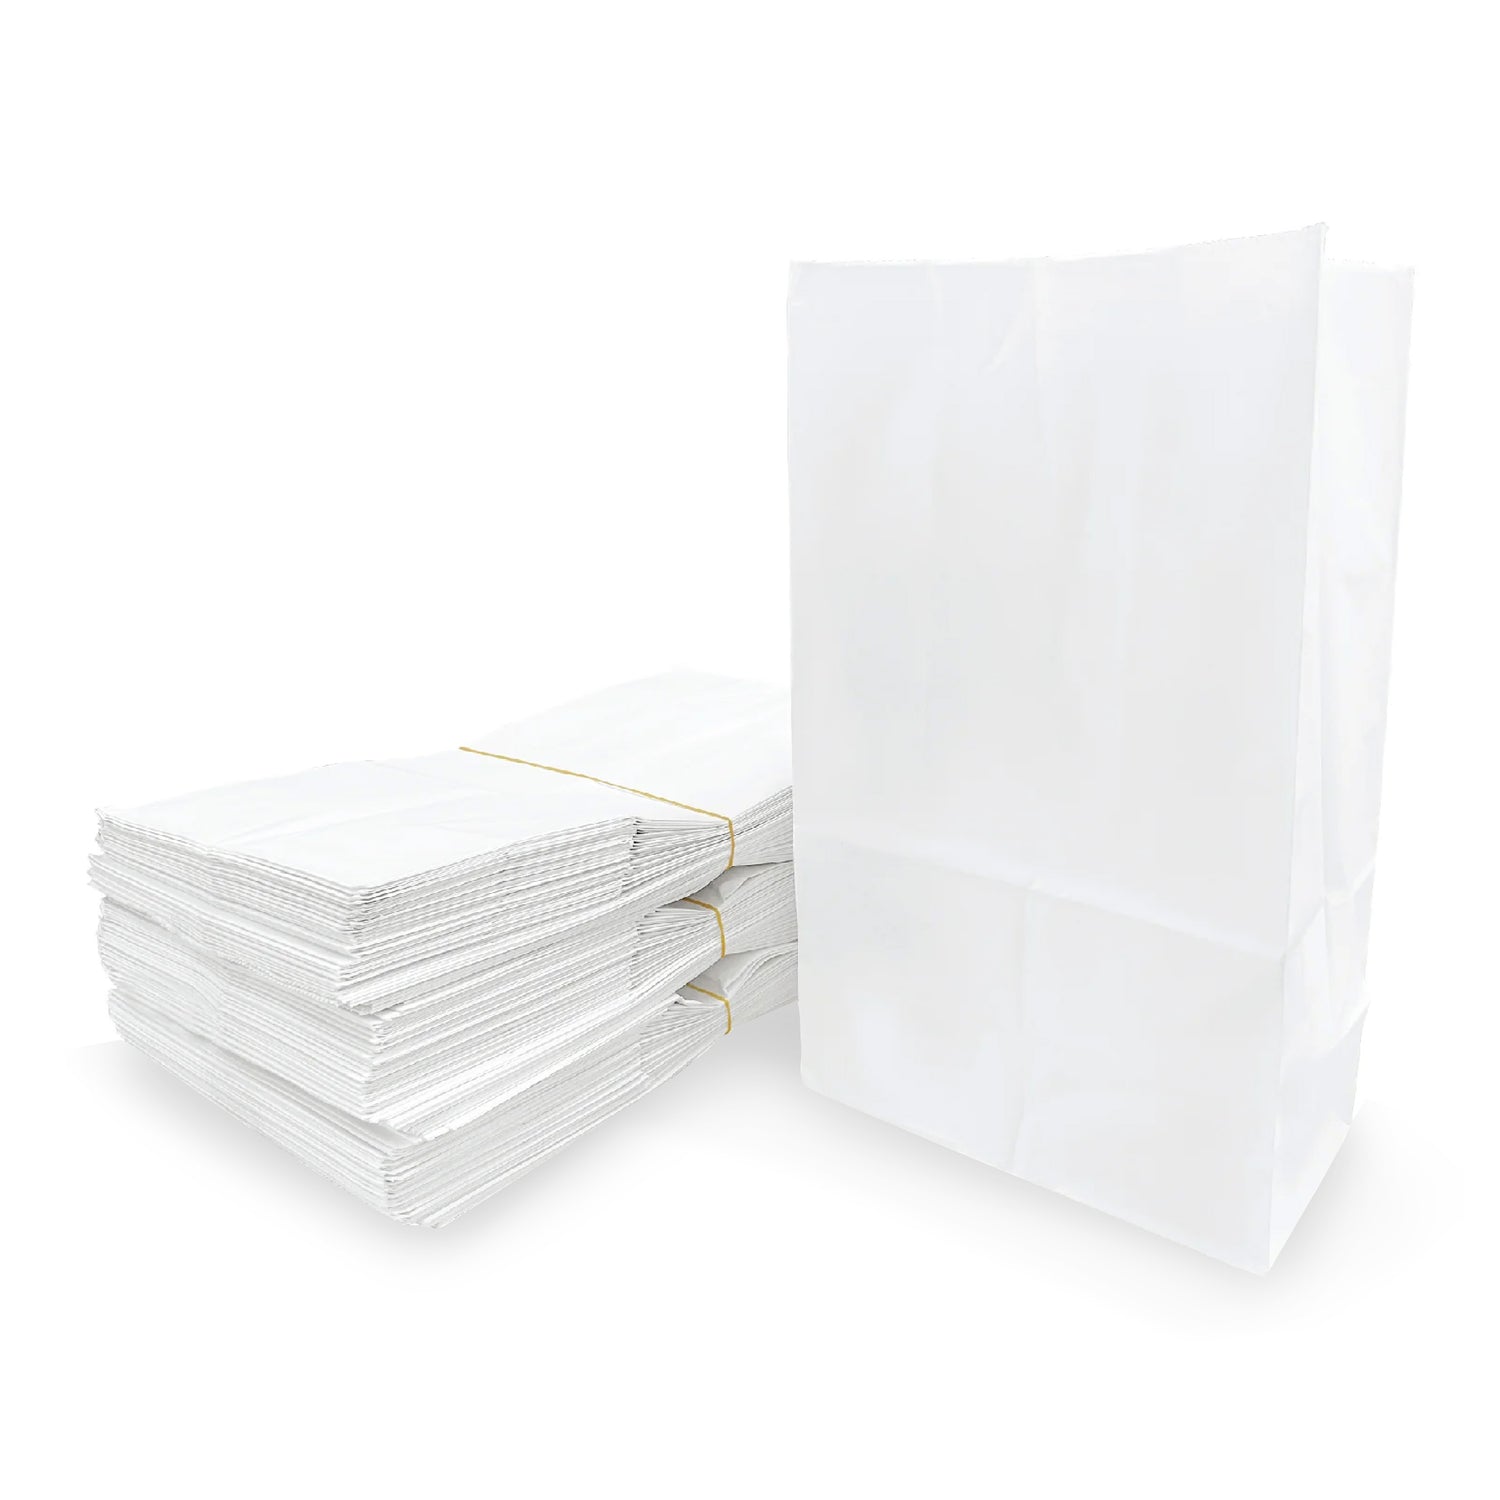 Oil-Resistant Paper Bags (for takeout) 白色防油外賣餐用紙袋